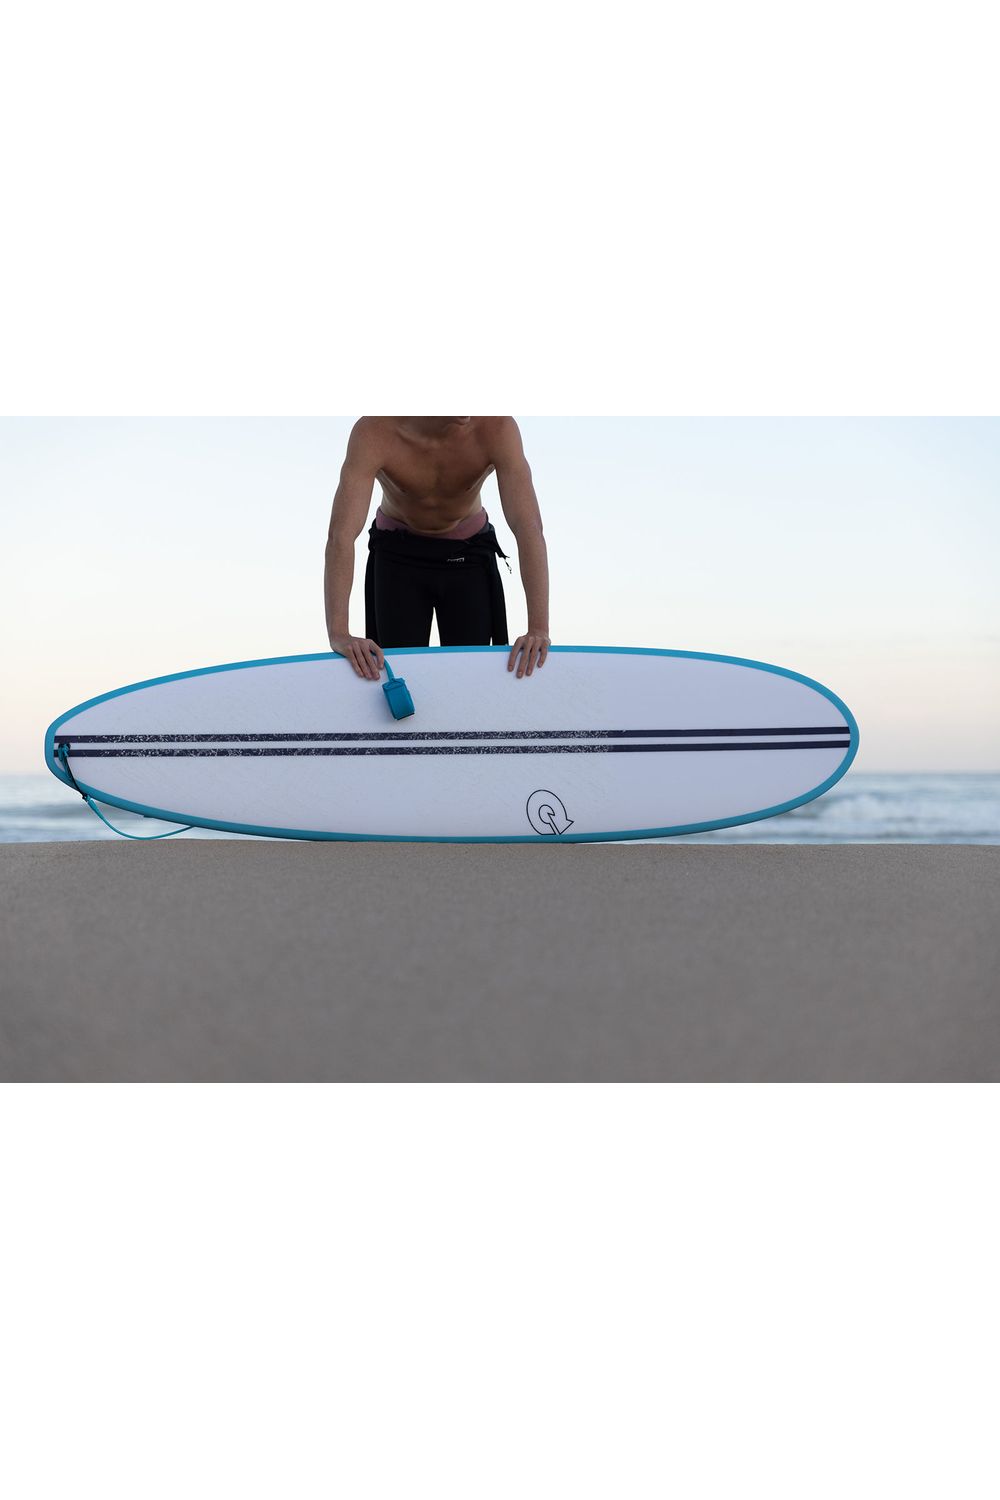 The Torq TEC V+ Surfboard In White